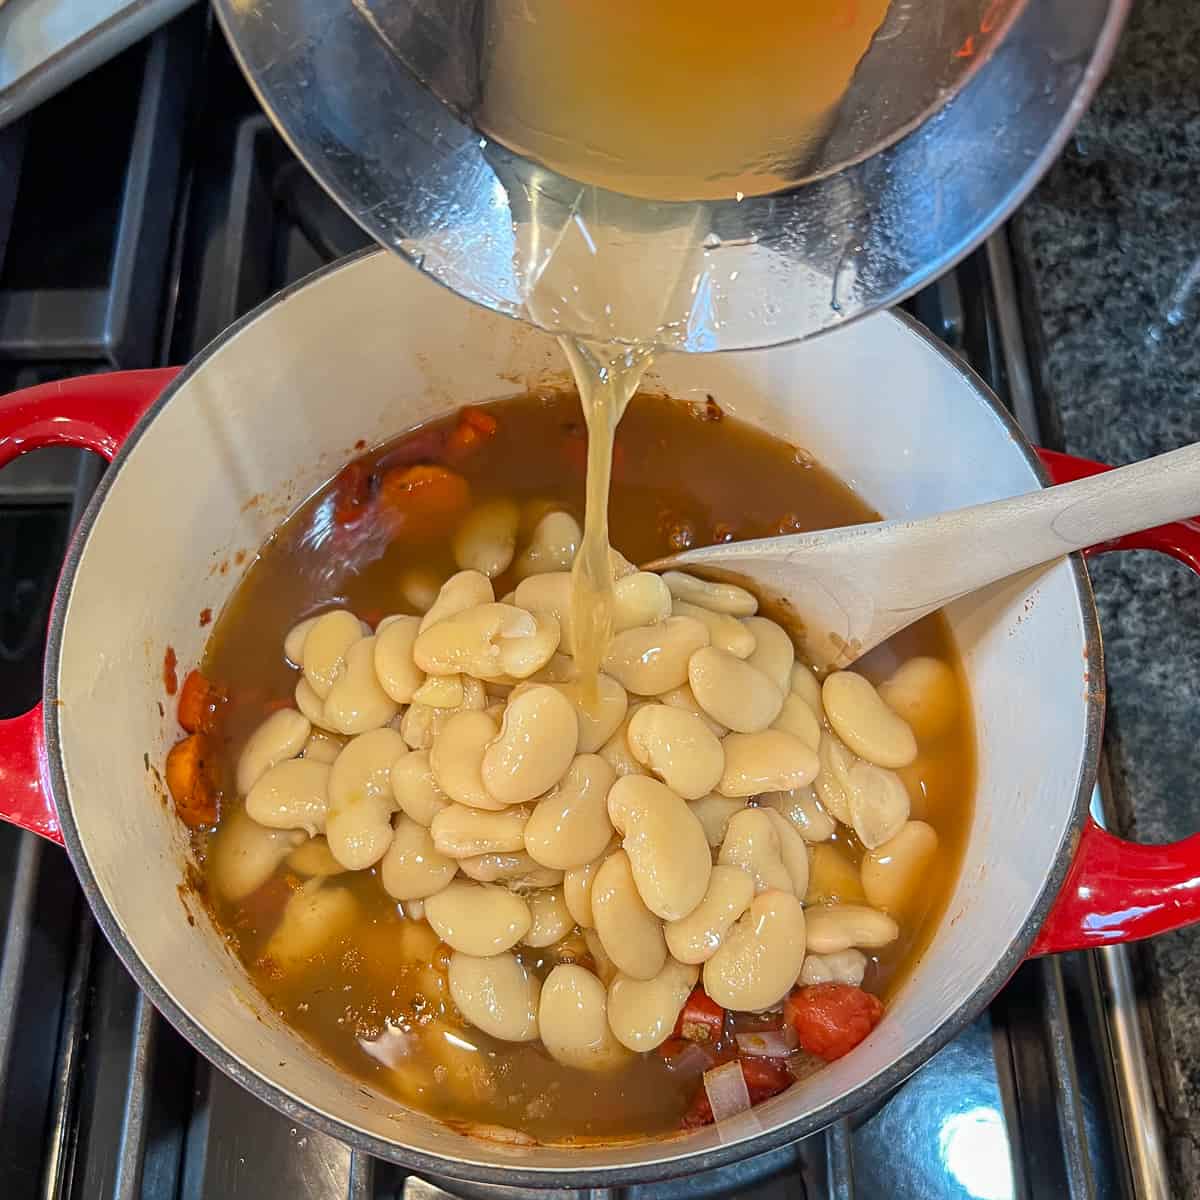 Low sodium vegetable broth being added to the pot with butter beans and vegetables.